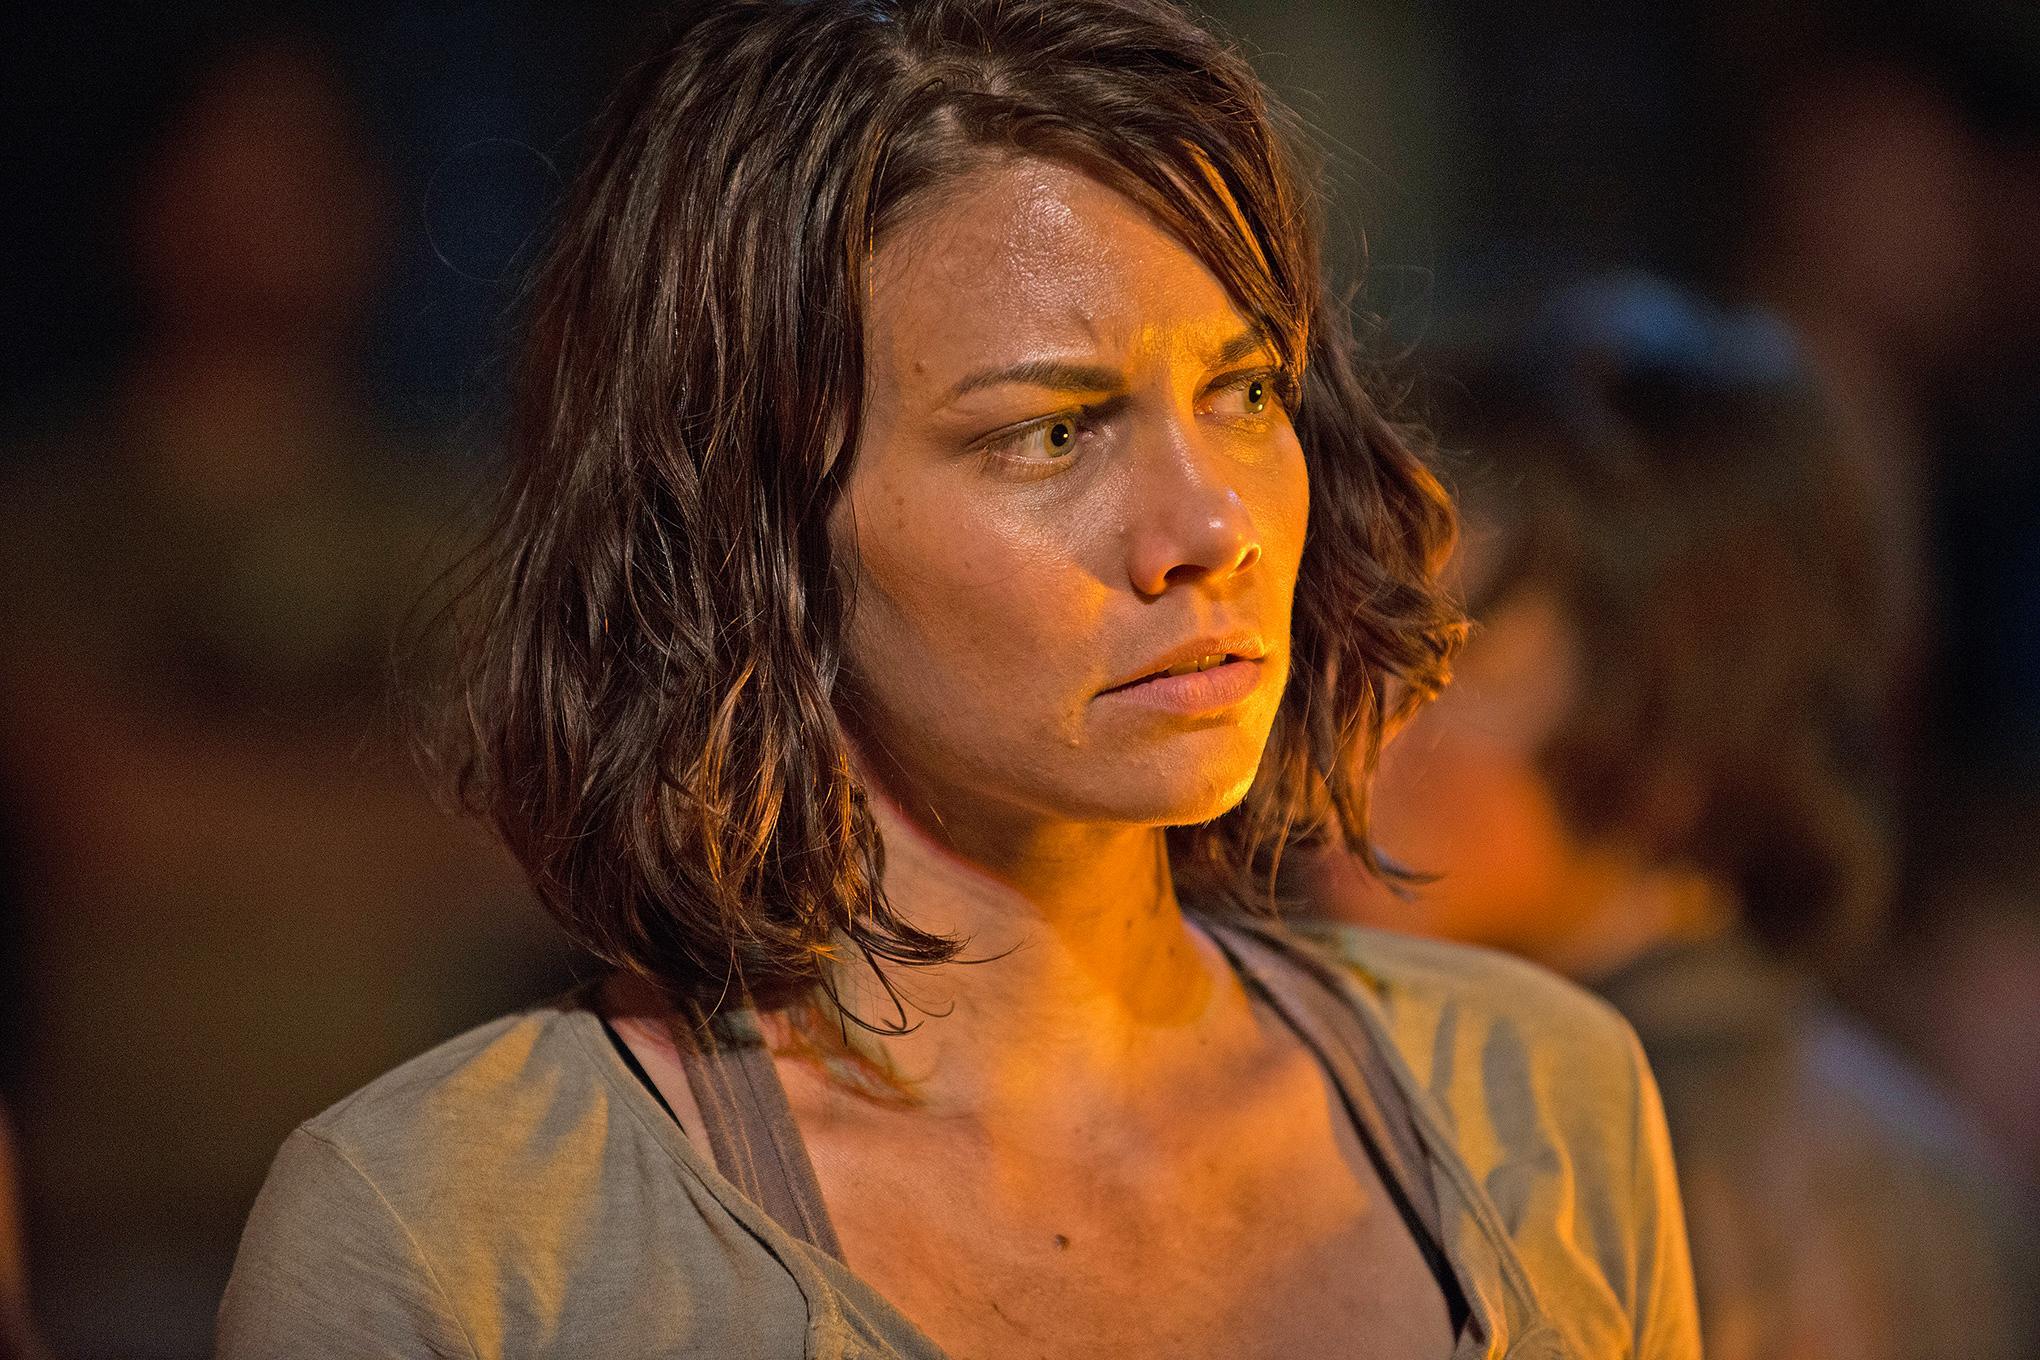 The Walking Deads Lauren Cohan Id Rather Have The Validation Of 1846